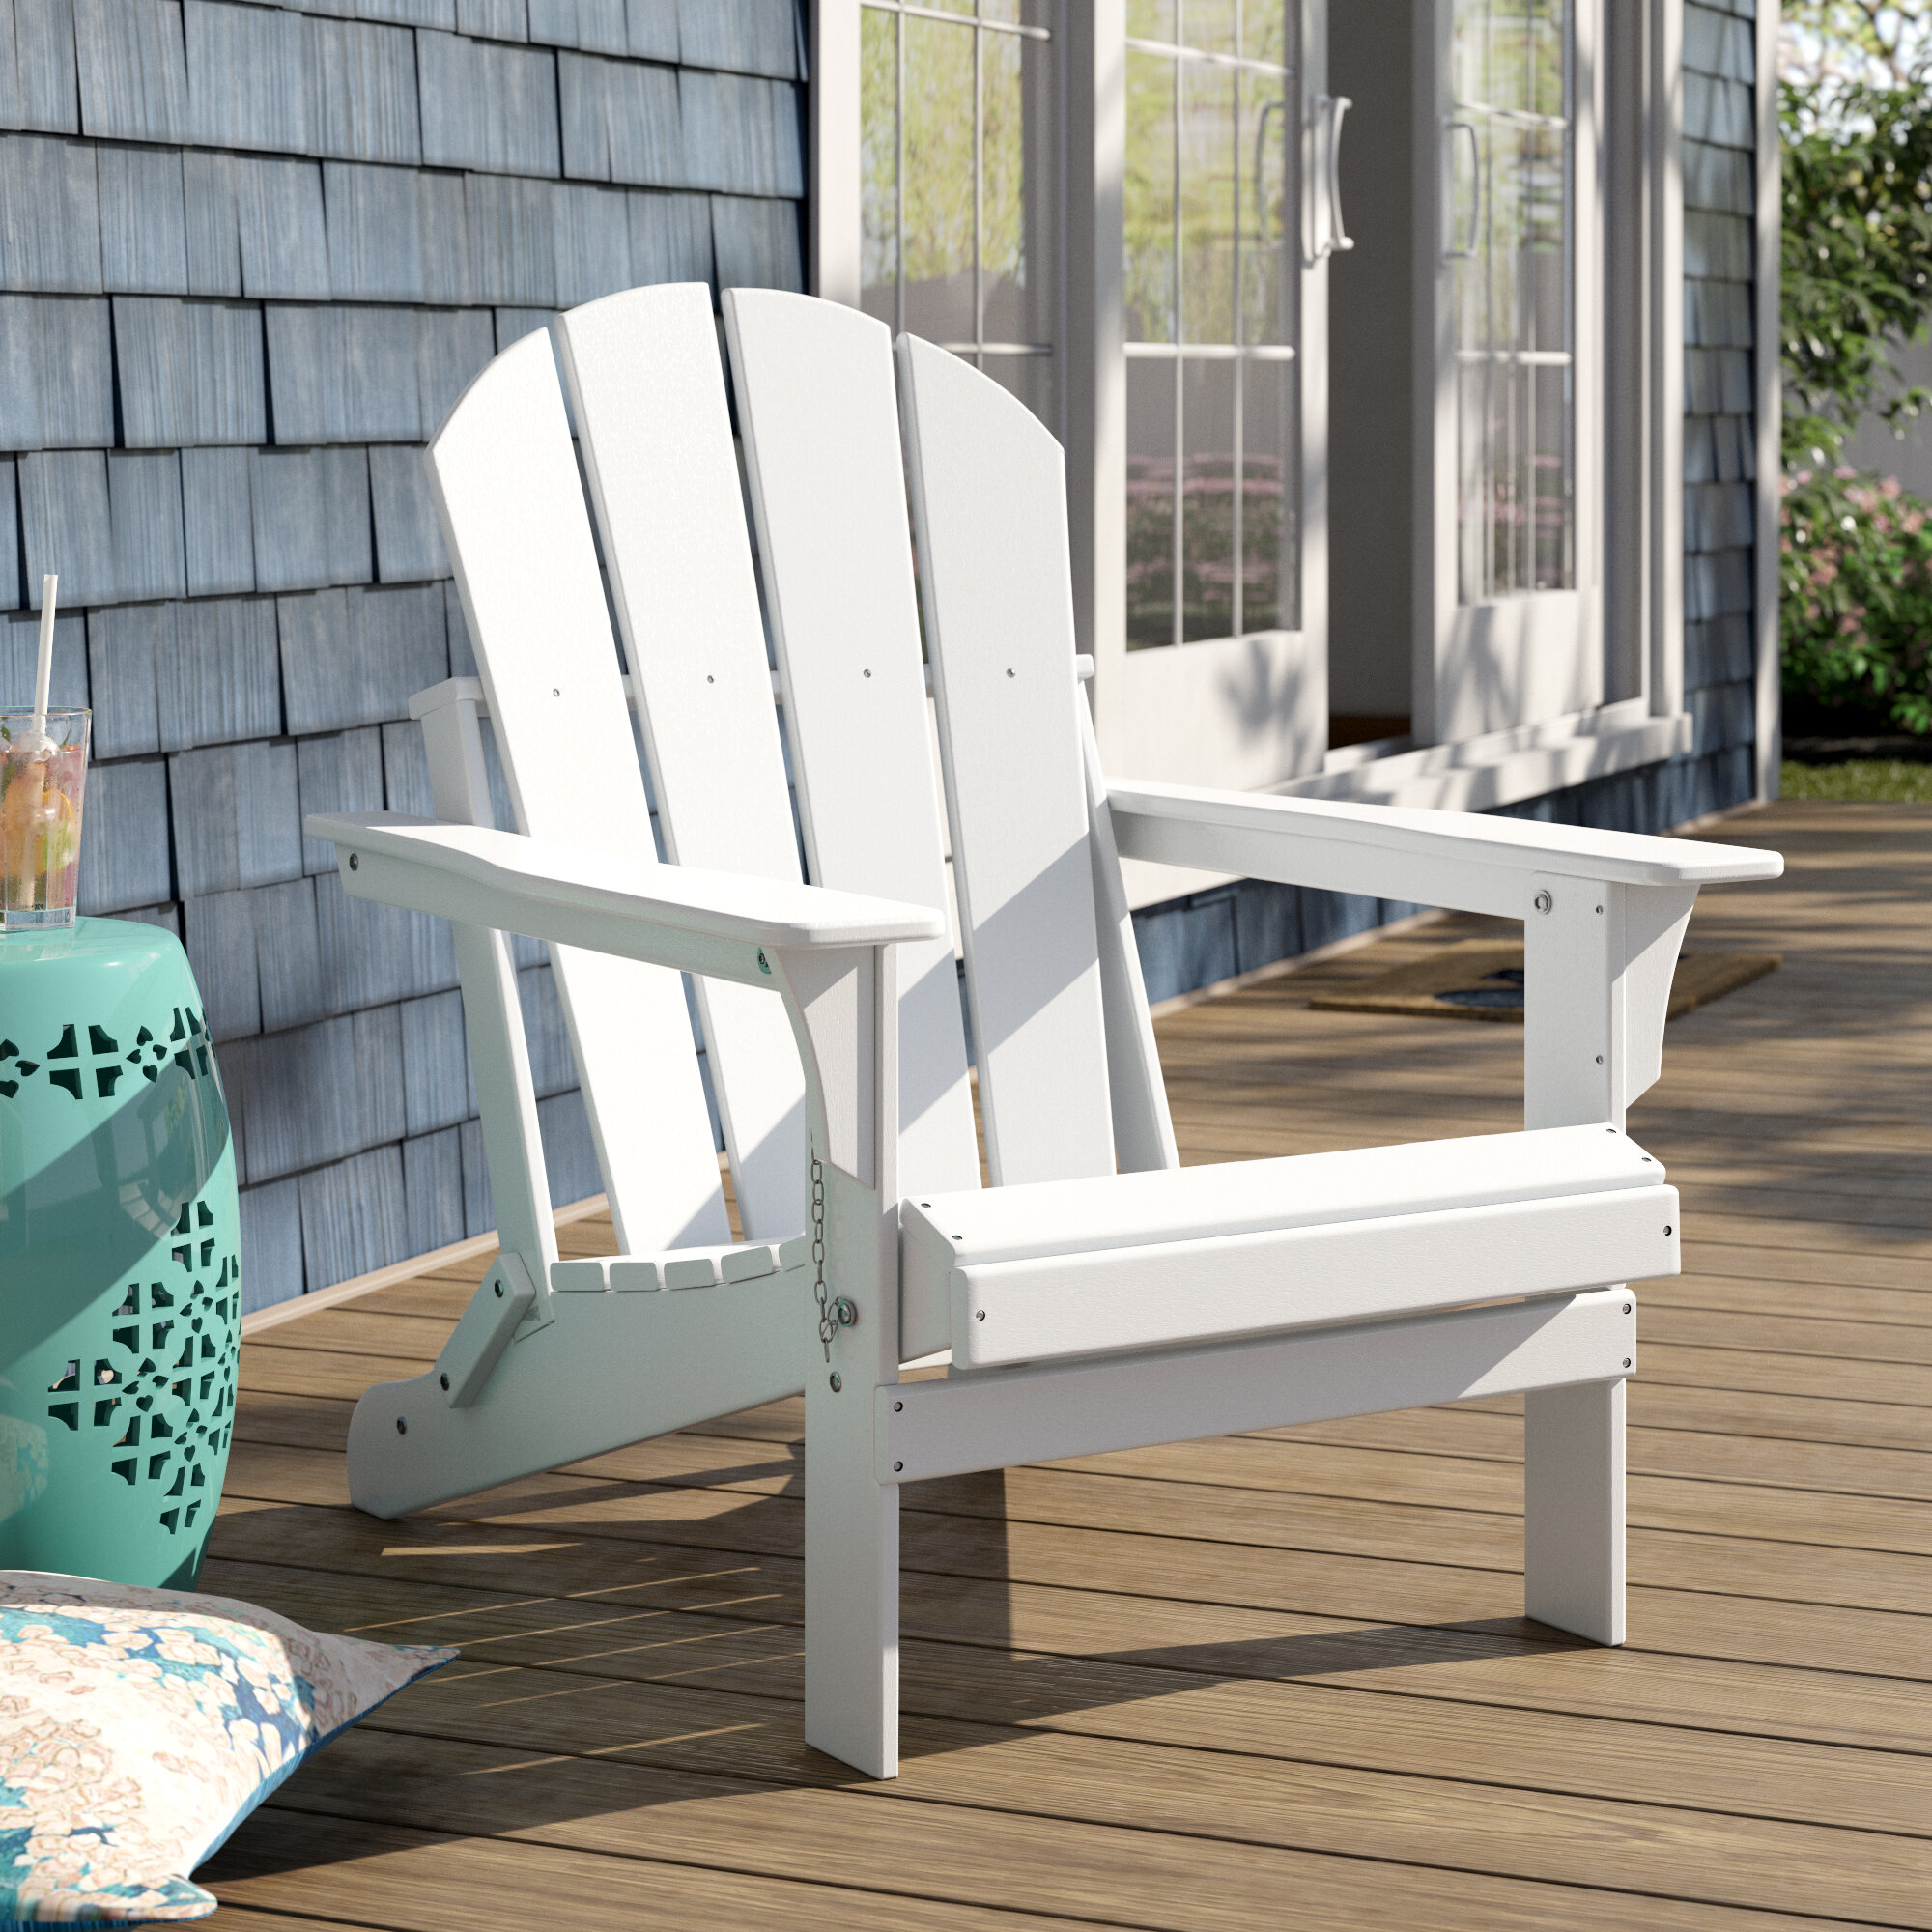 Wayfair Folding Adirondack Chairs Online Hotsell, UP TO 20 OFF ...